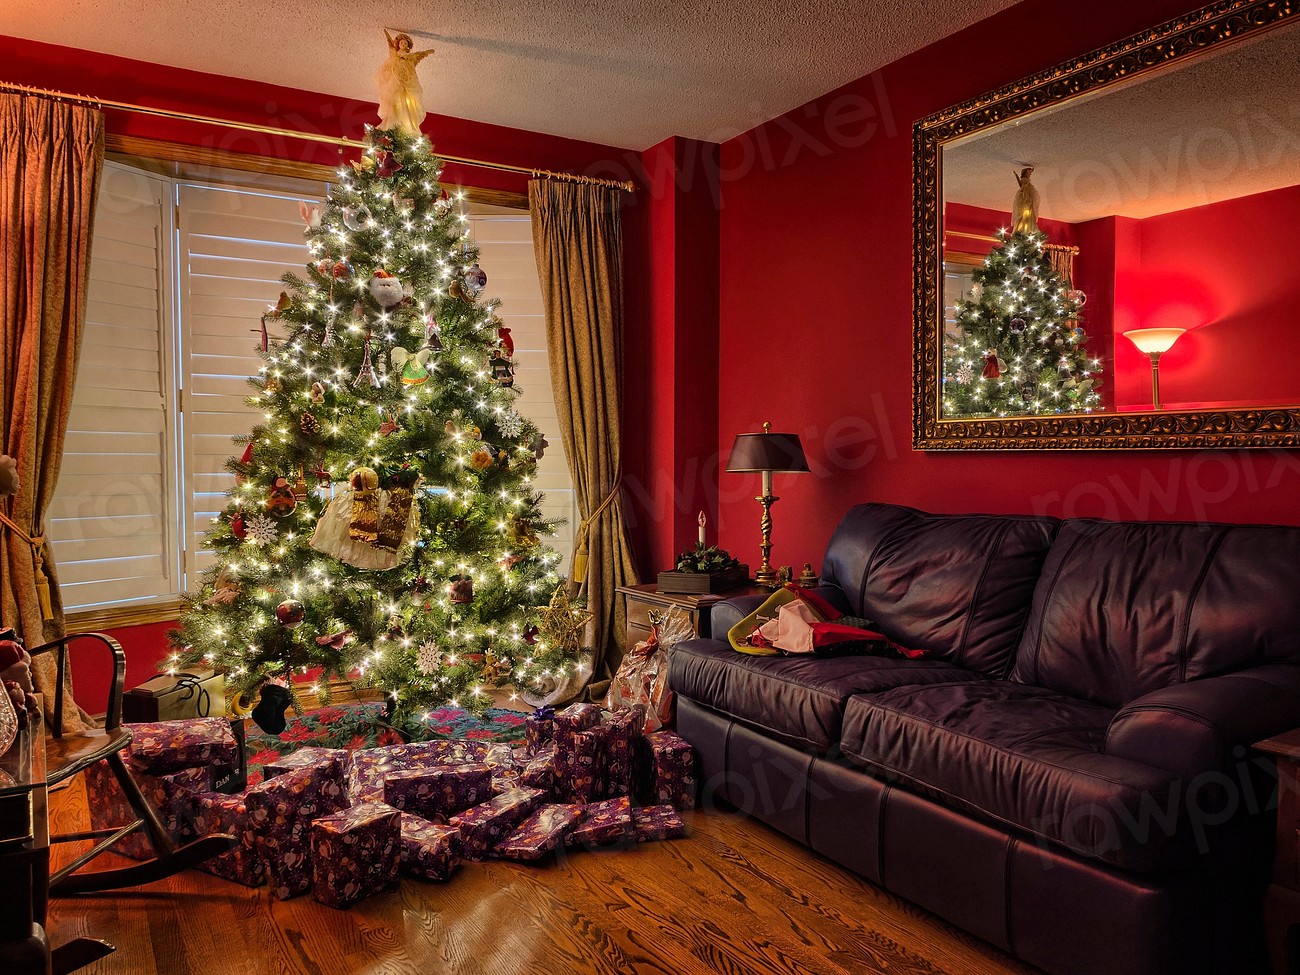 A living room where we can see a Christmas tree with presents around it. We can also see a sofa, a mirror, a window and part of a wheelchair.